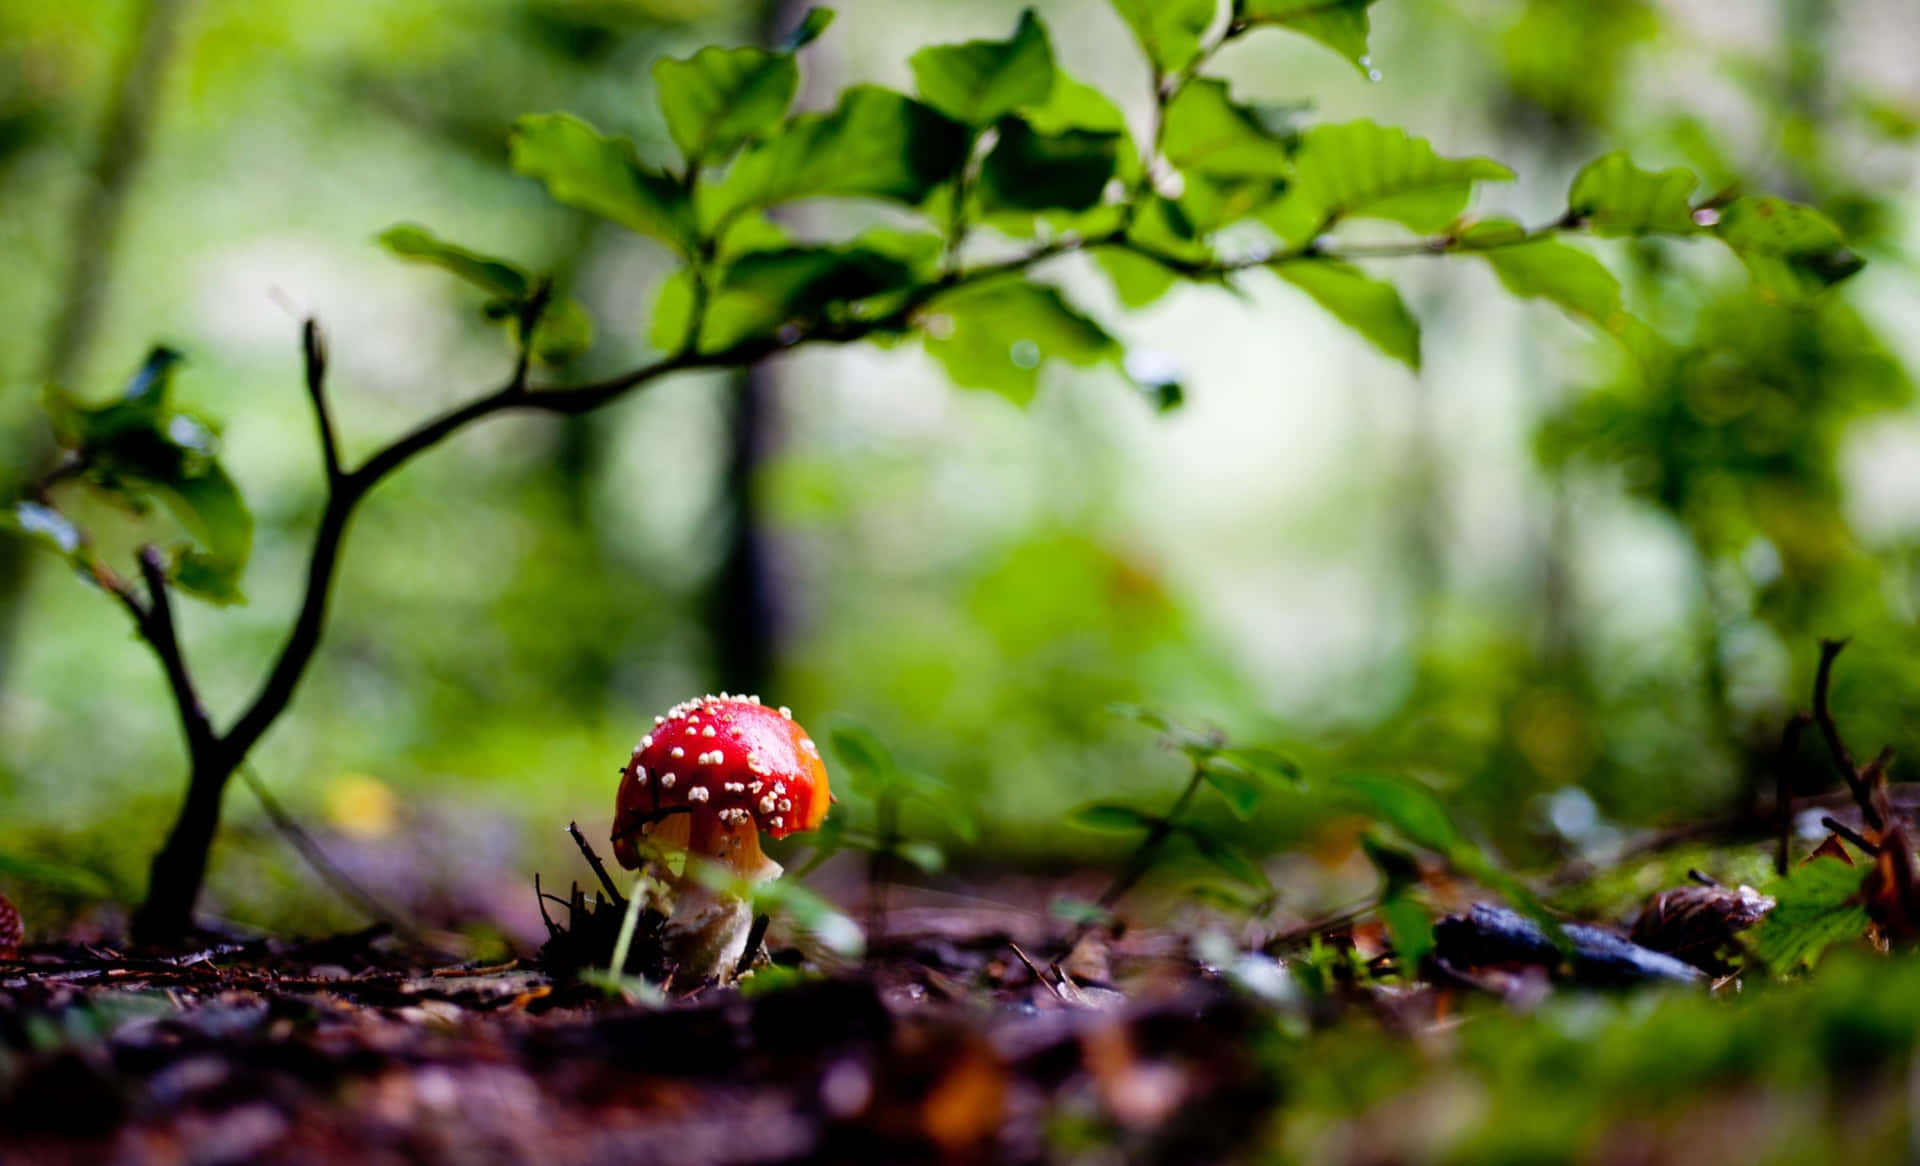 "A unique and beautiful mushroom in the woods"